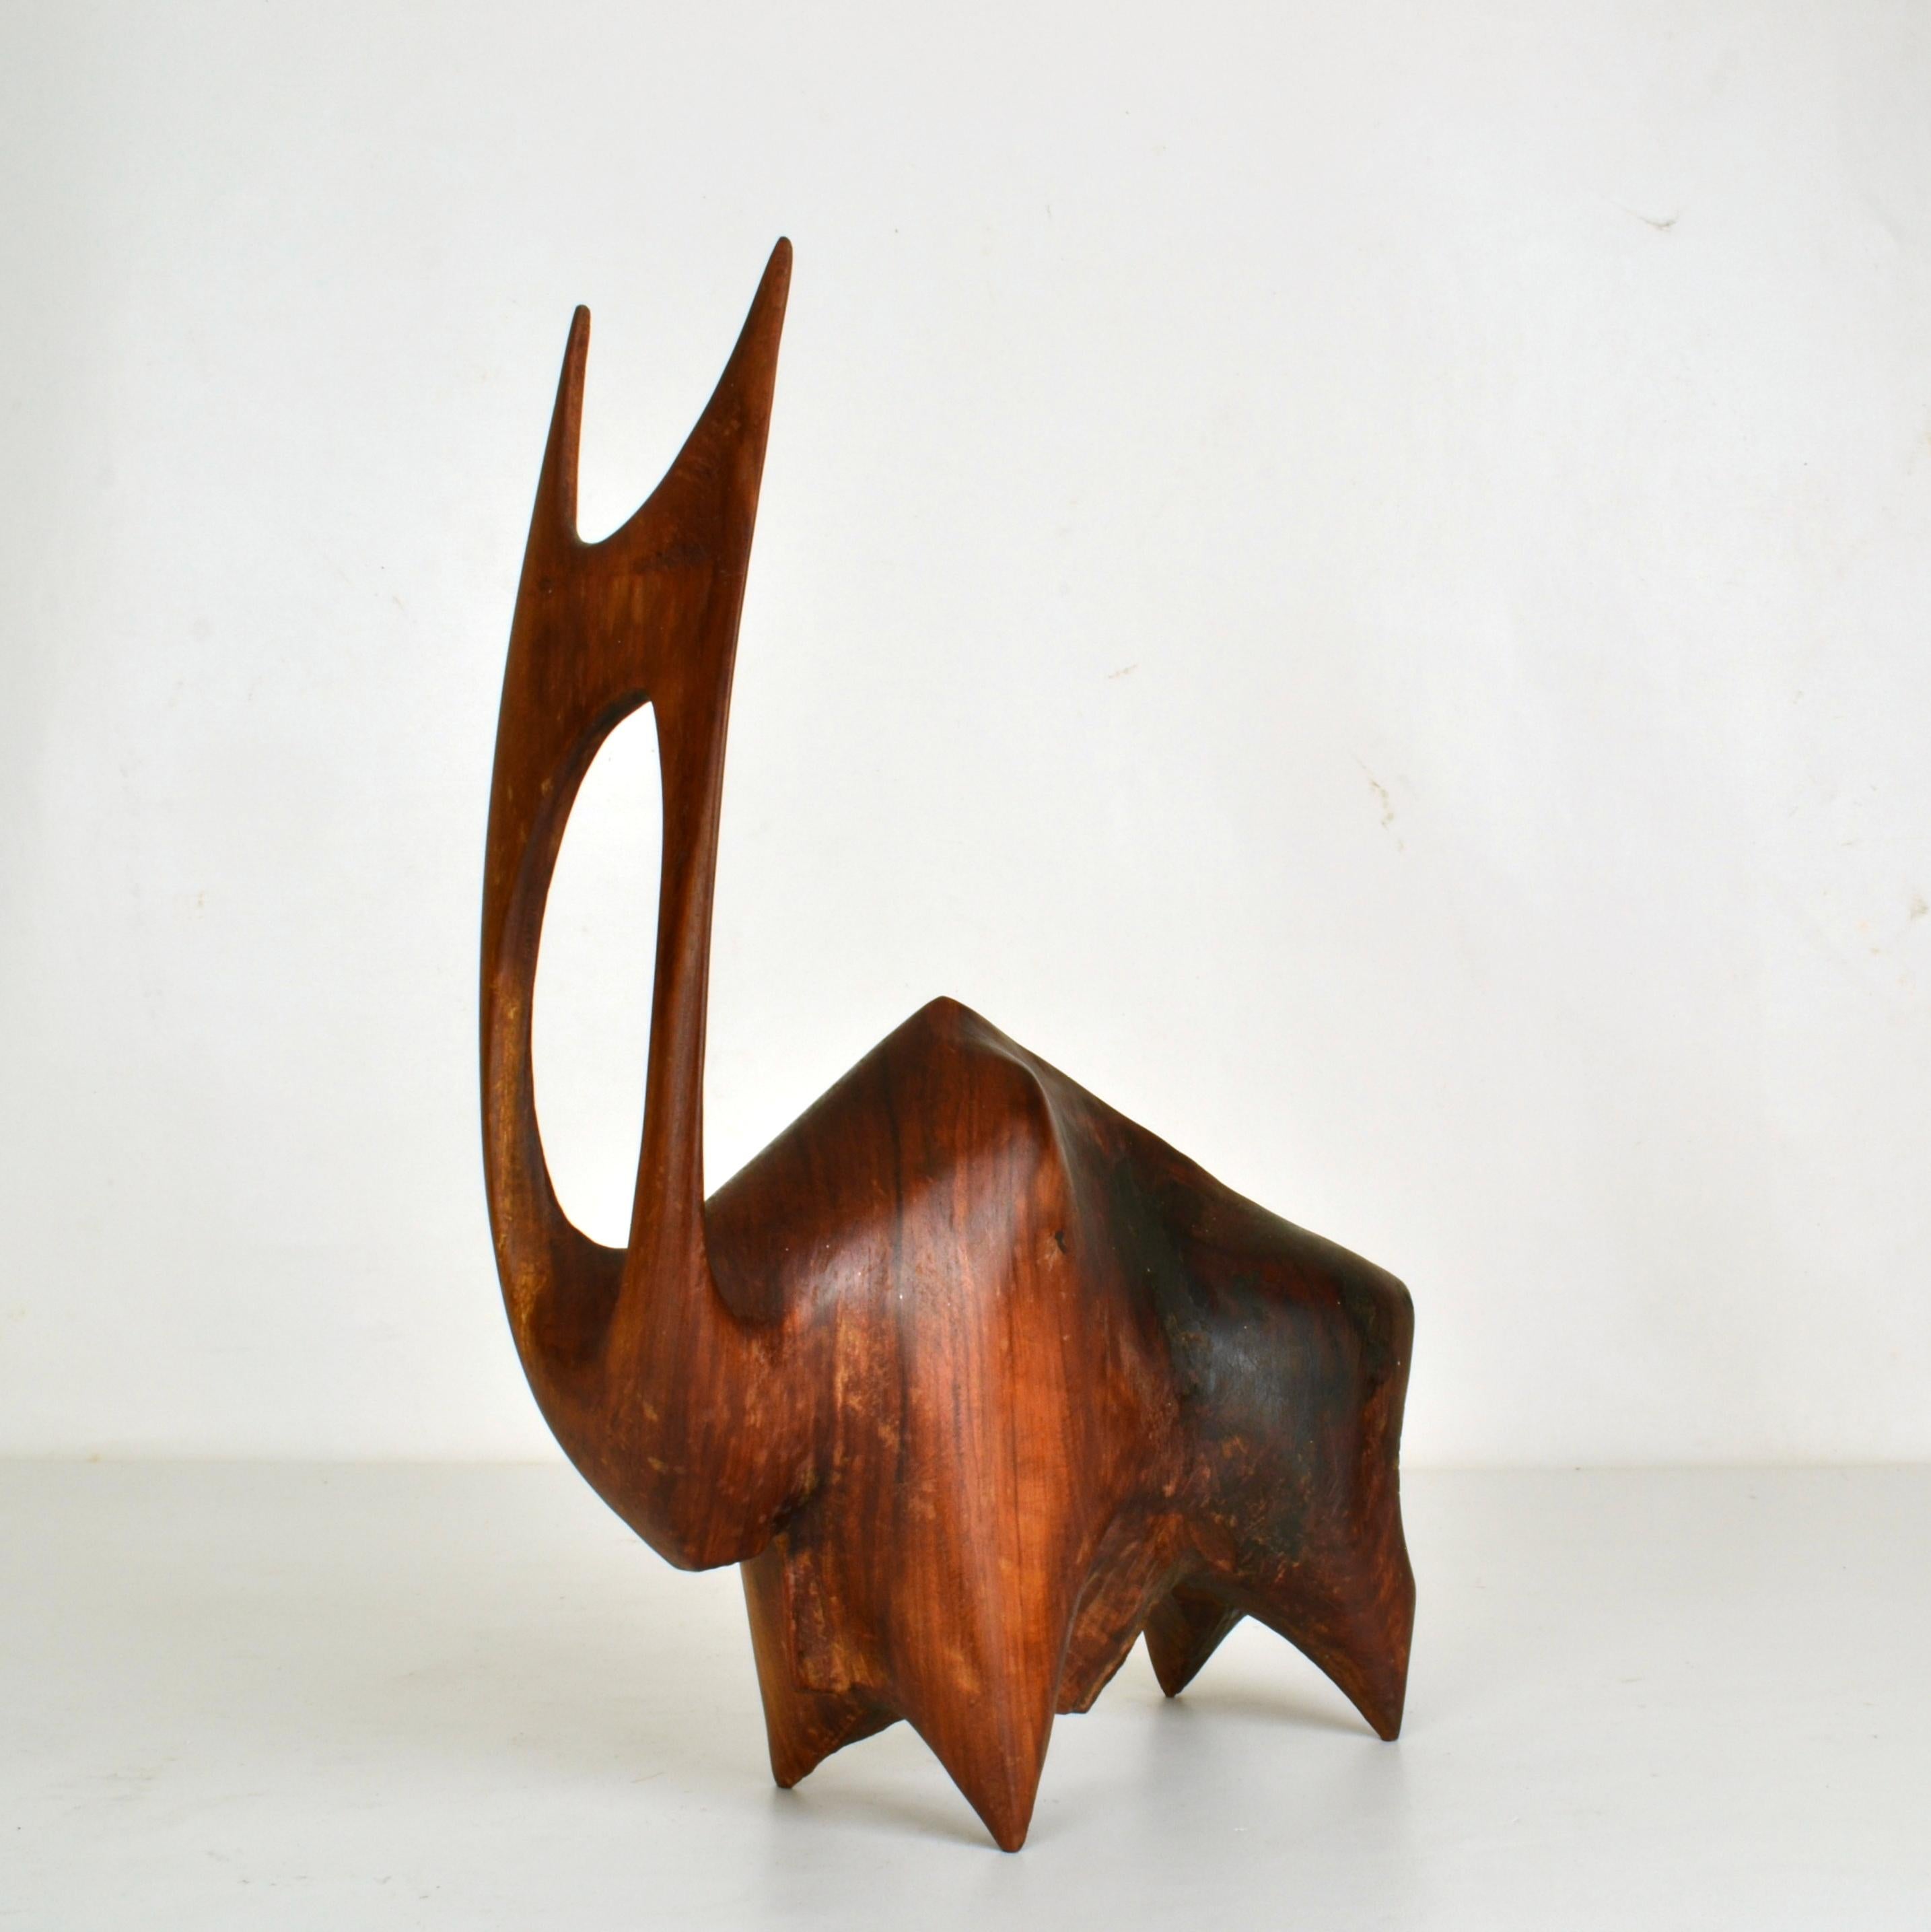 Contemporary sculpture of a large buffalo or bull emphases on the elaborate horns and powerful body. It is hand carved from hardwood circa 1970.
The water buffalo, also called the domestic water buffalo or Asian water buffalo, is a large beast